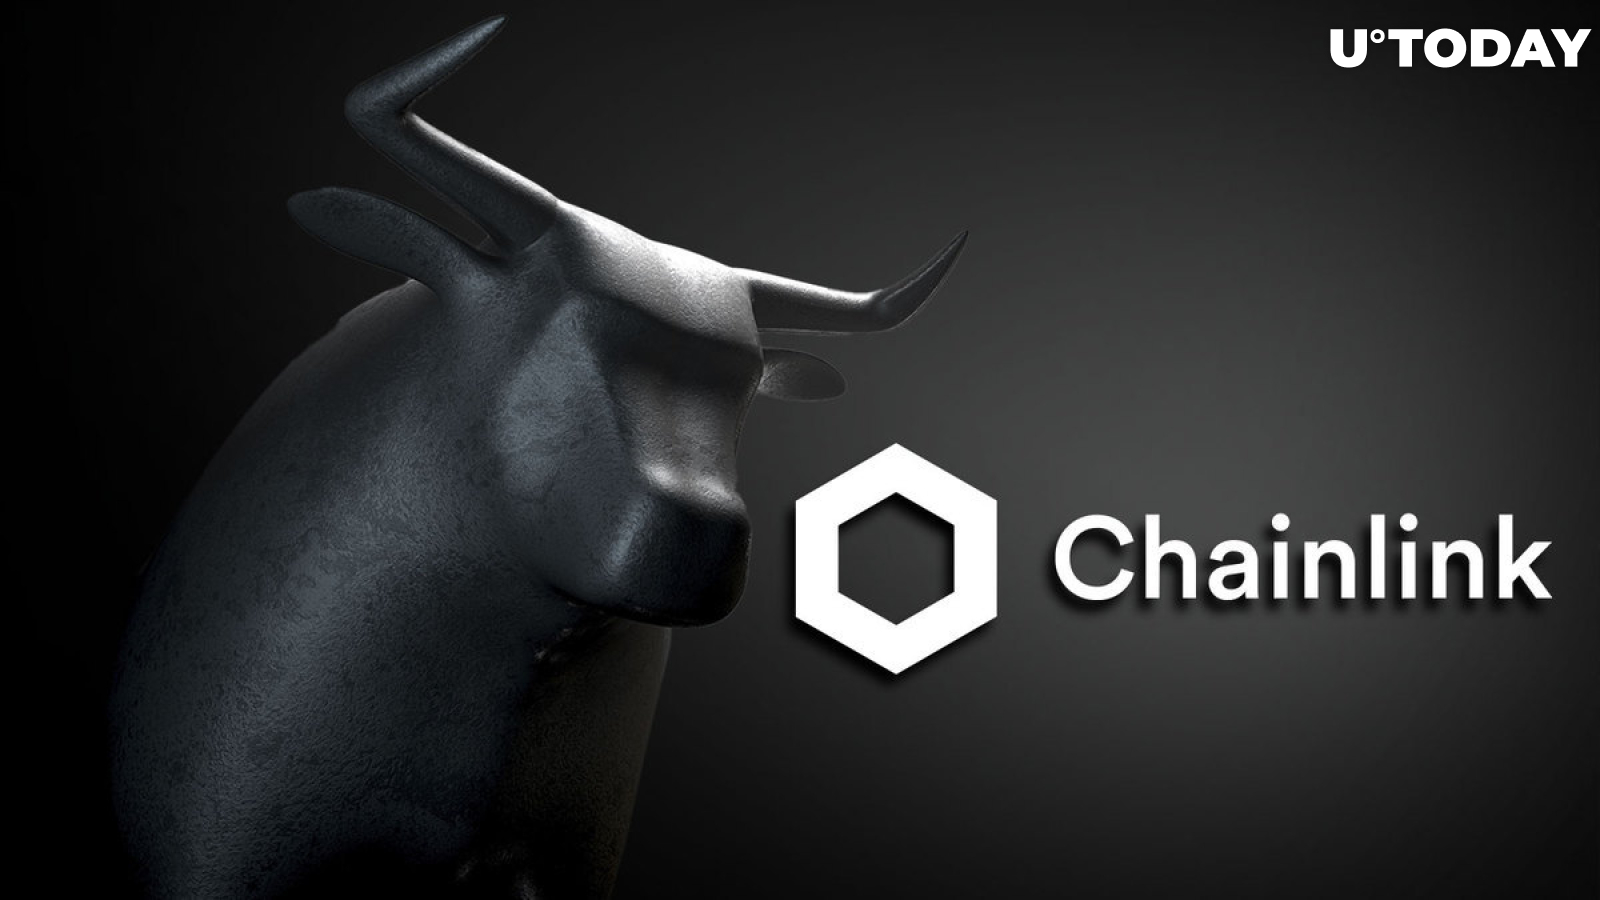 Chainlink Activity on Rise, LINK Shows Bullish Tendencies